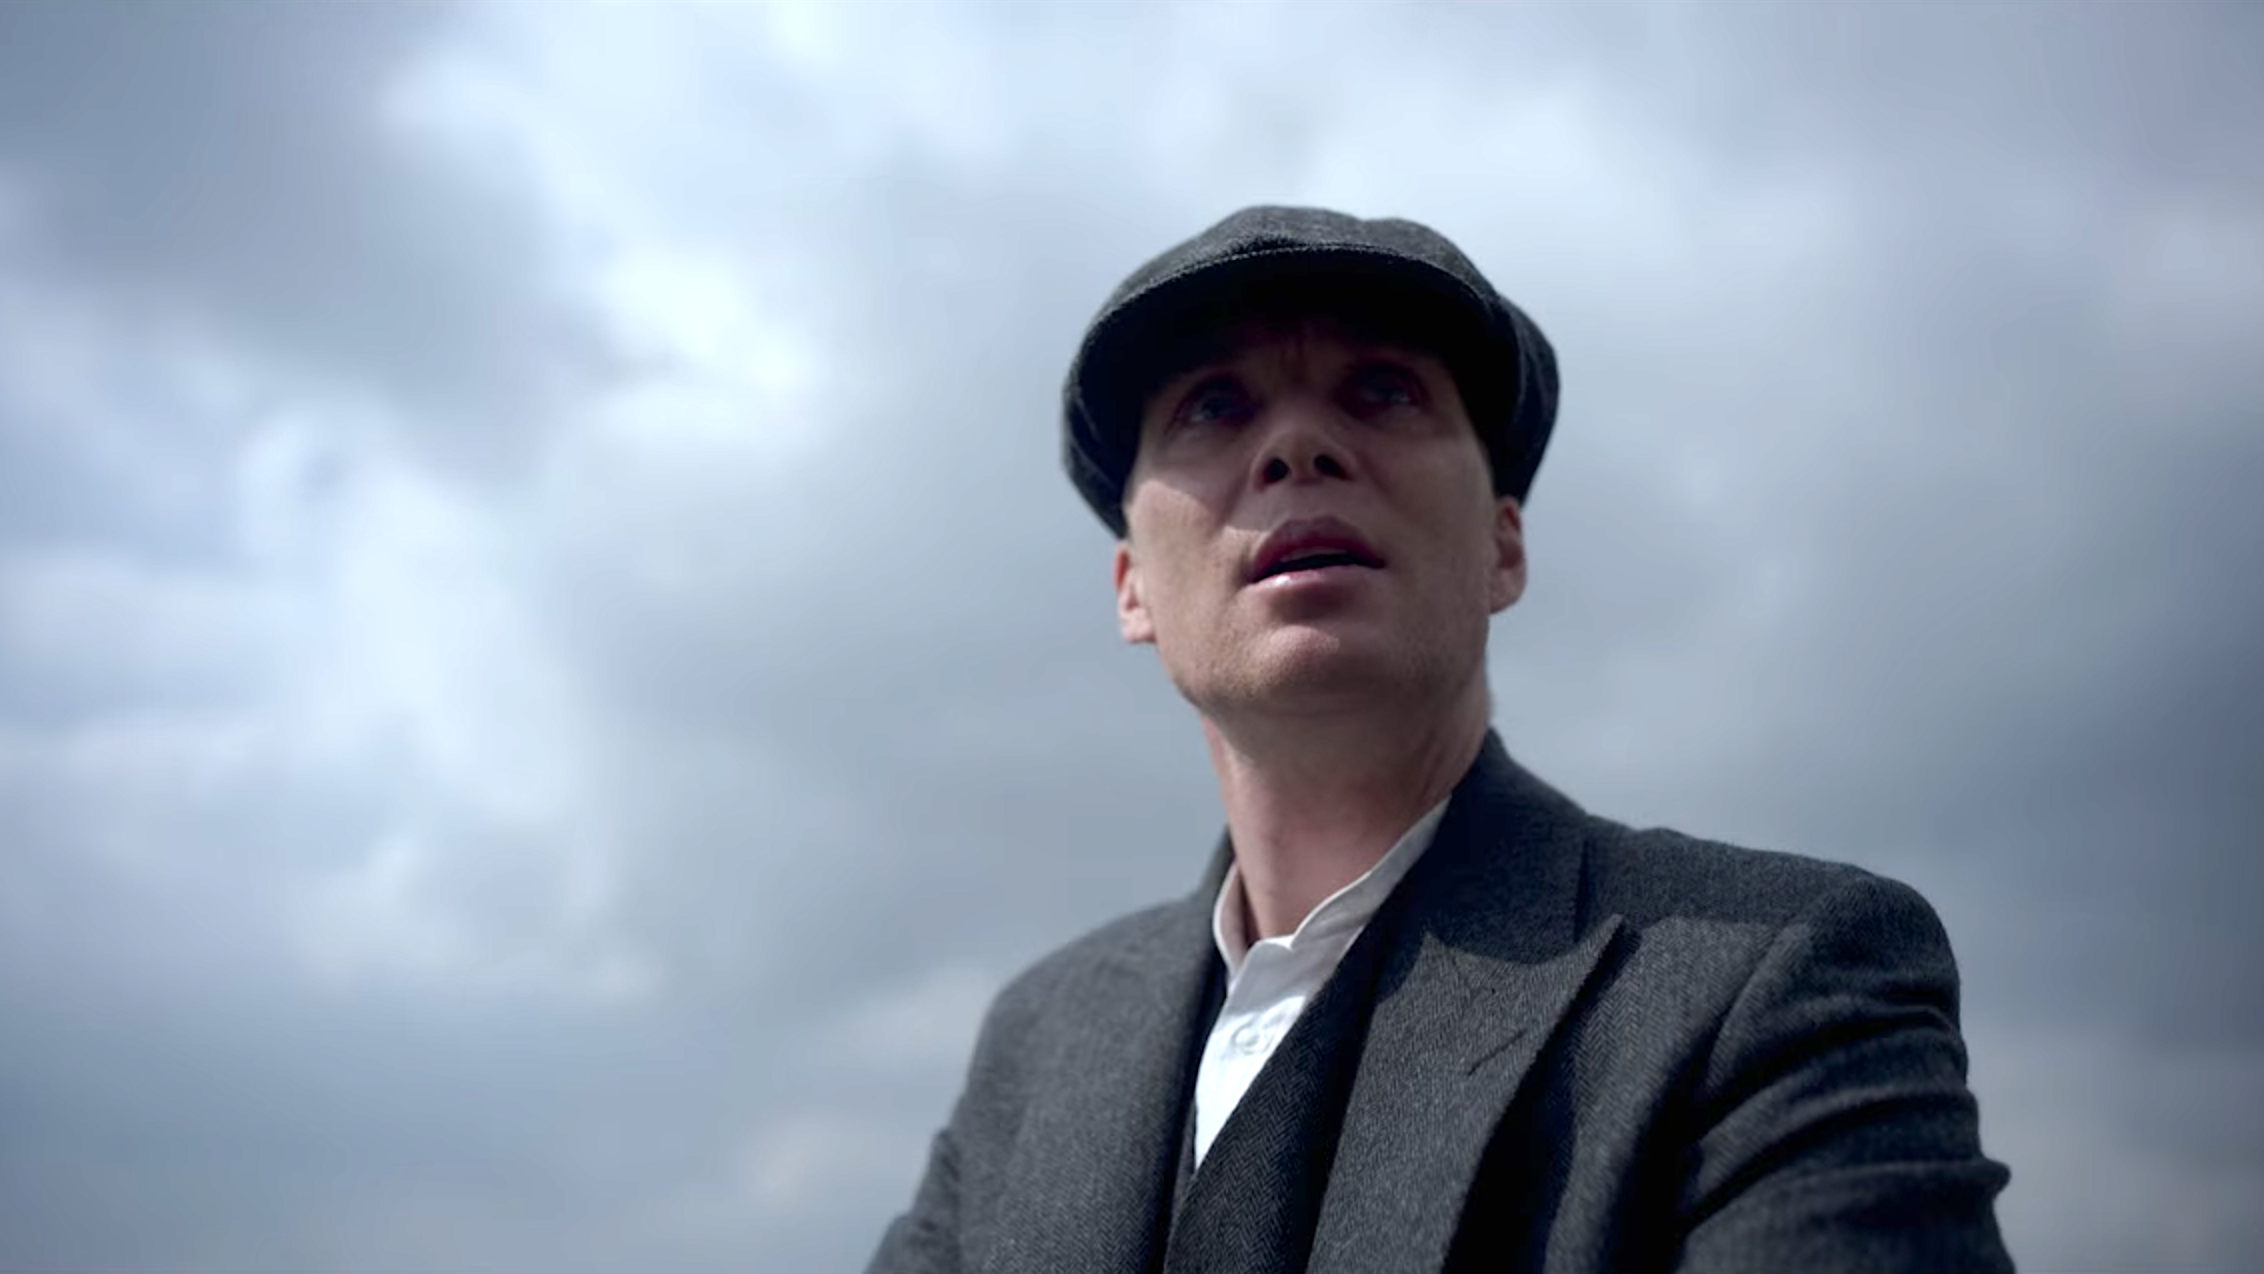 What does Peaky Blinders mean? Story behind the BBC drama